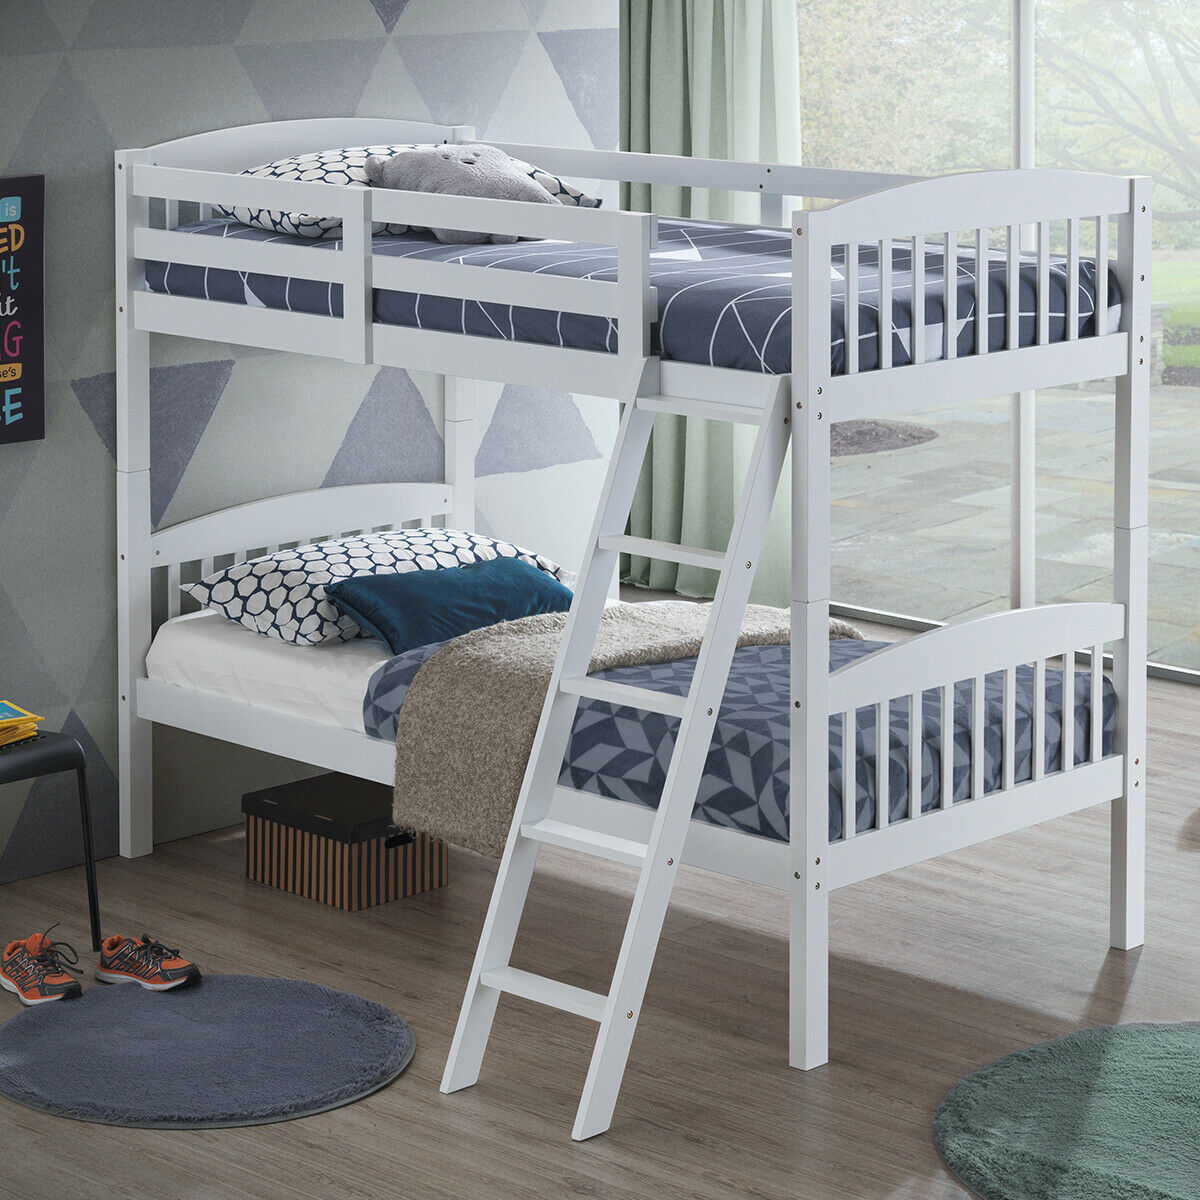 Costway Wood Hardwood Twin Bunk Beds, Twin Bunk Bed White Wood